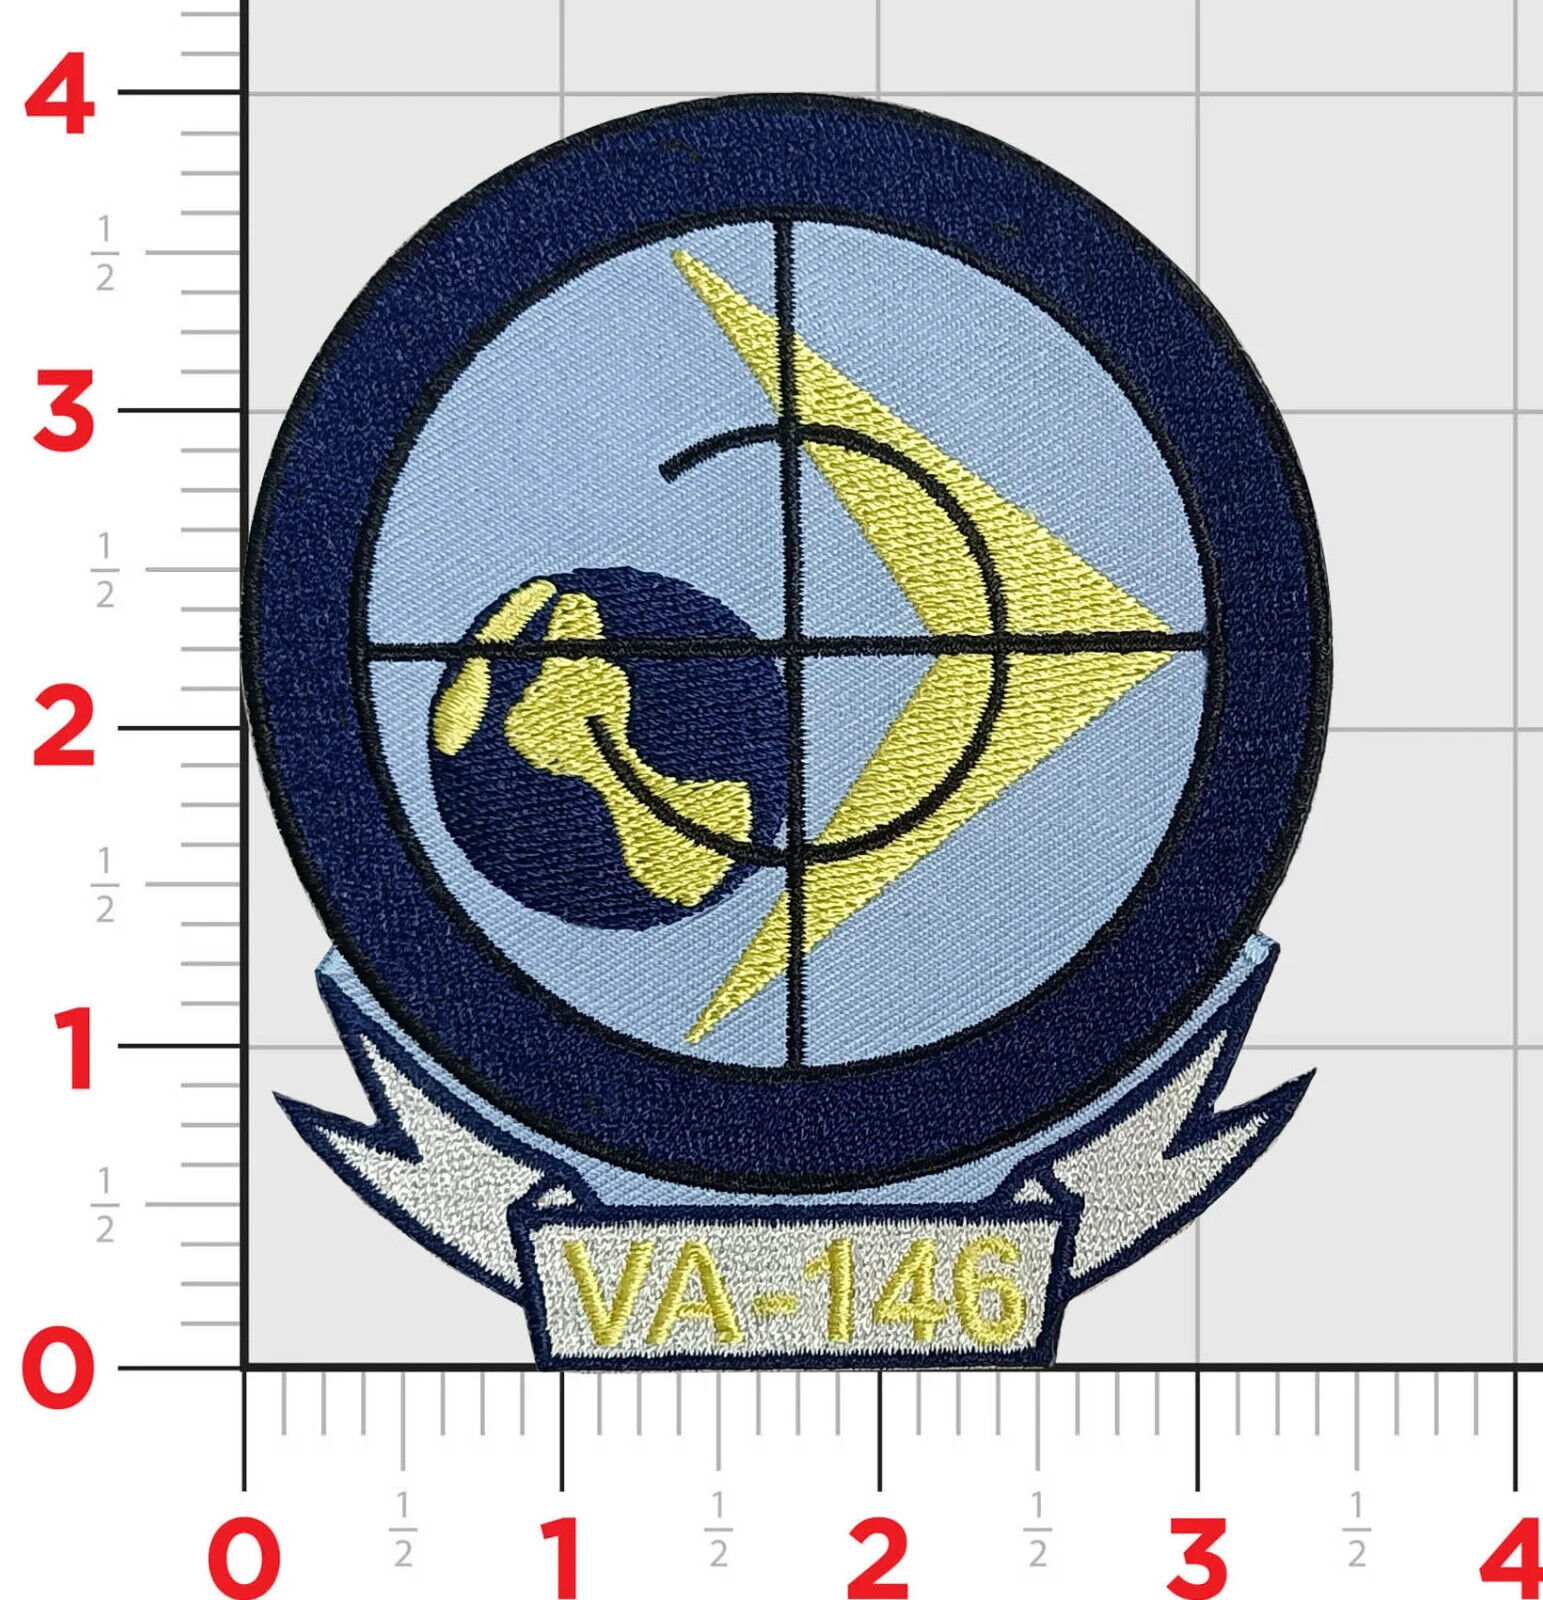 VA-146 VFA-146 BLUE DIAMONDS SQUADRON HOOK & LOOP EMBROIDERED  PATCH